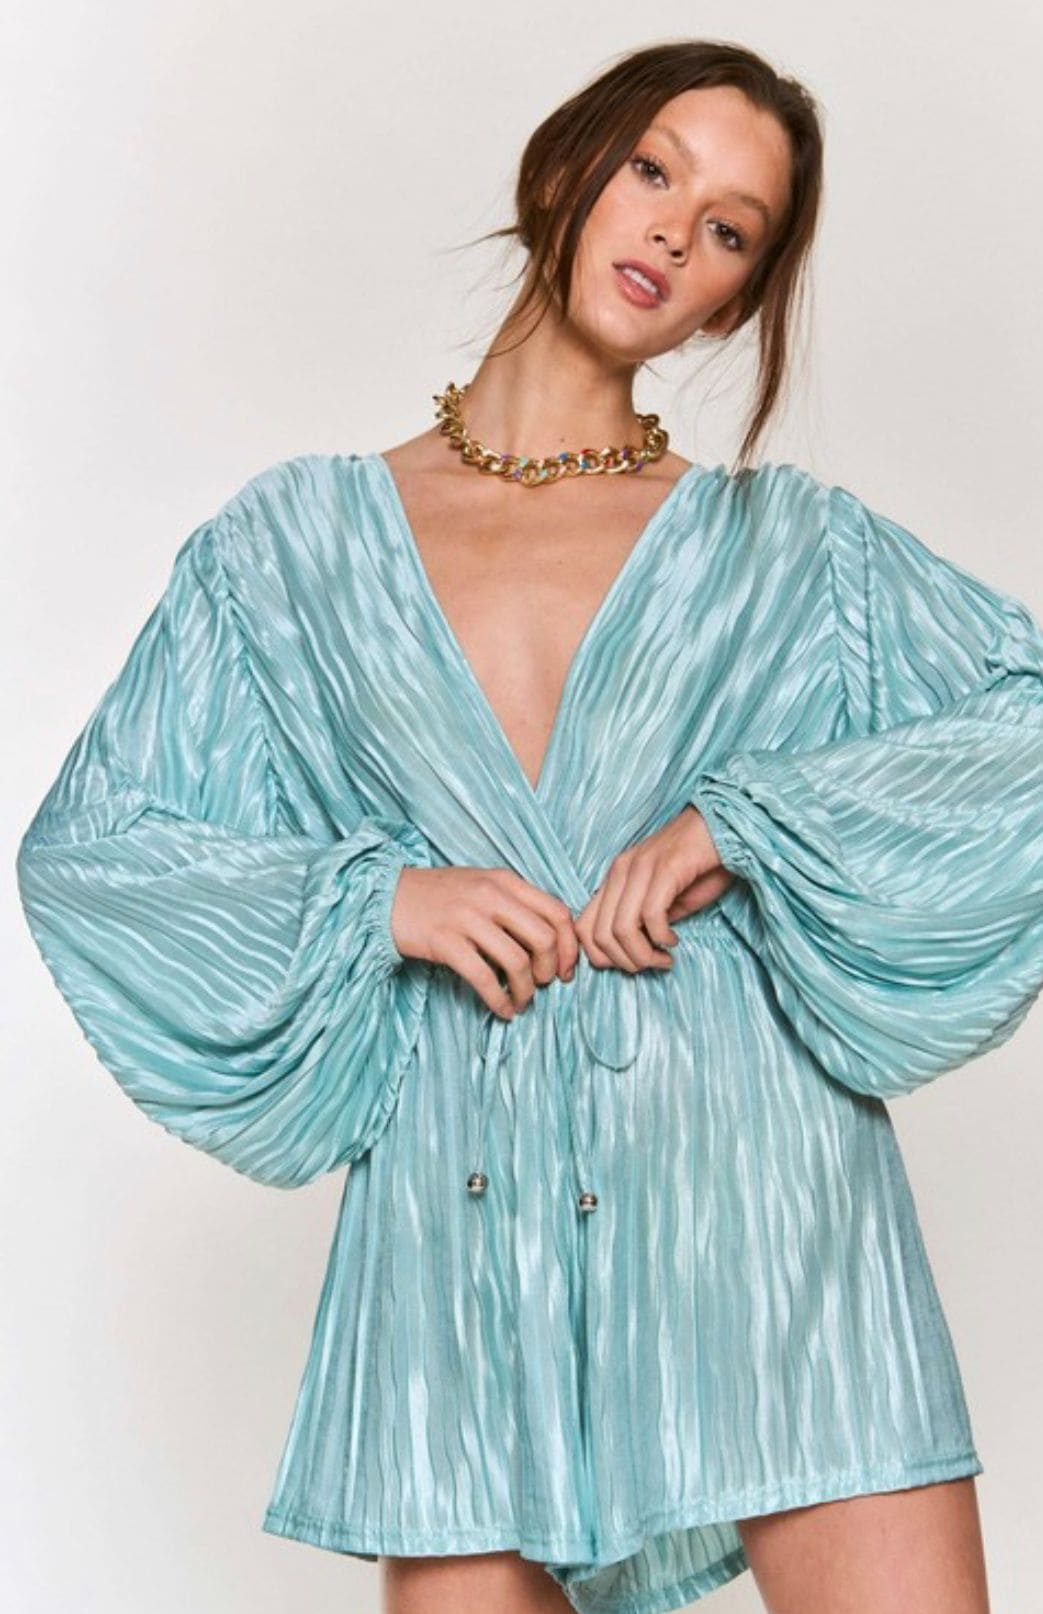 "Minty Fresh: A Satin Rib Long Sleeve Romper for a Chic and Trendy Look"